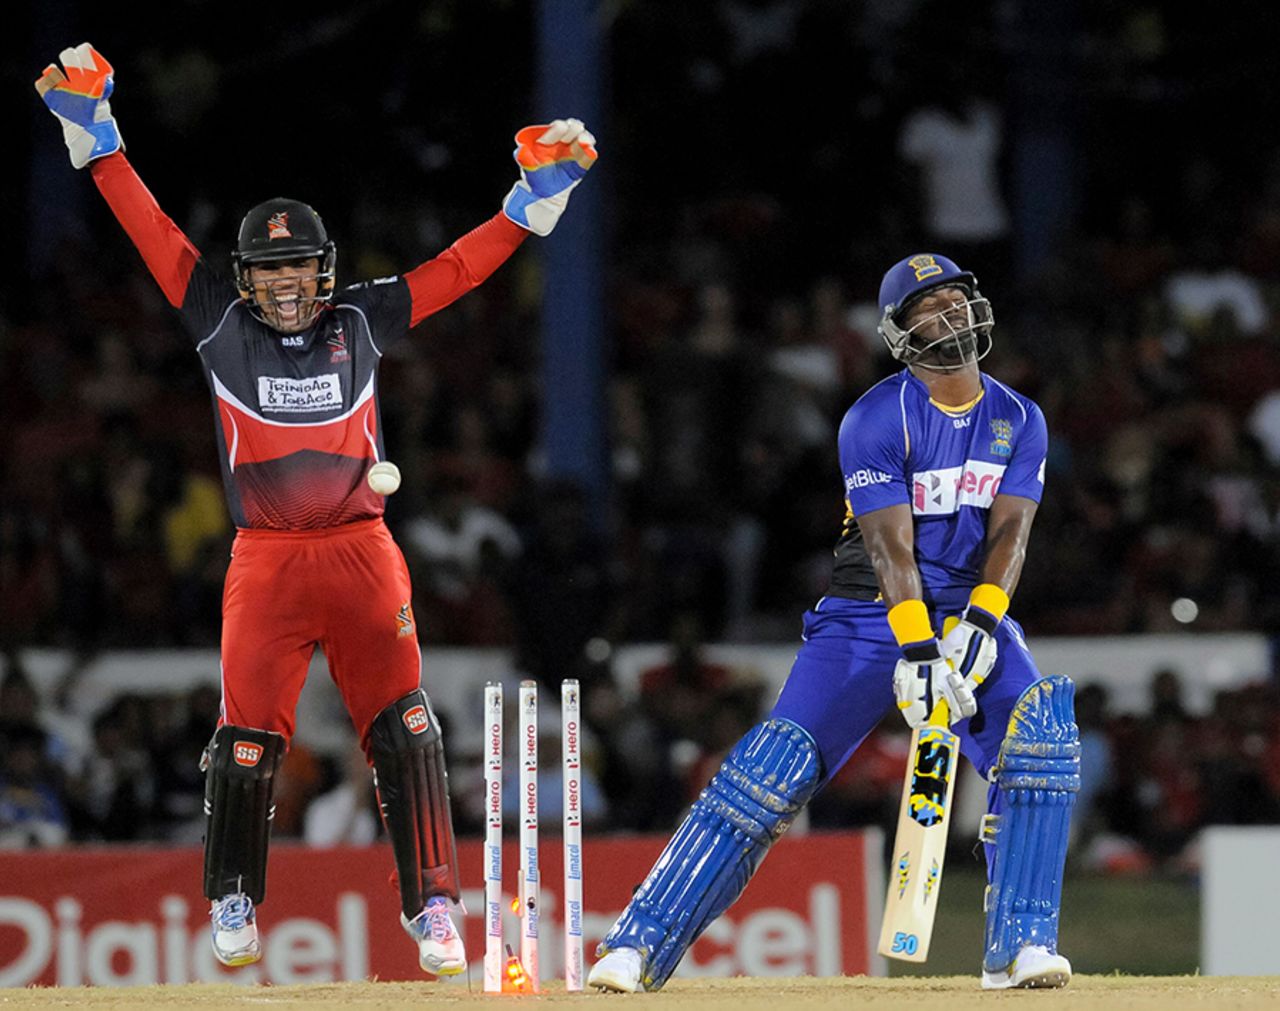 Dwayne Smith was bowled by Sulieman Benn for 49, Trinidad & Tobago Red Steel v Barbados Tridents, CPL 2015, final, Port-of-Spain, July 26, 2015